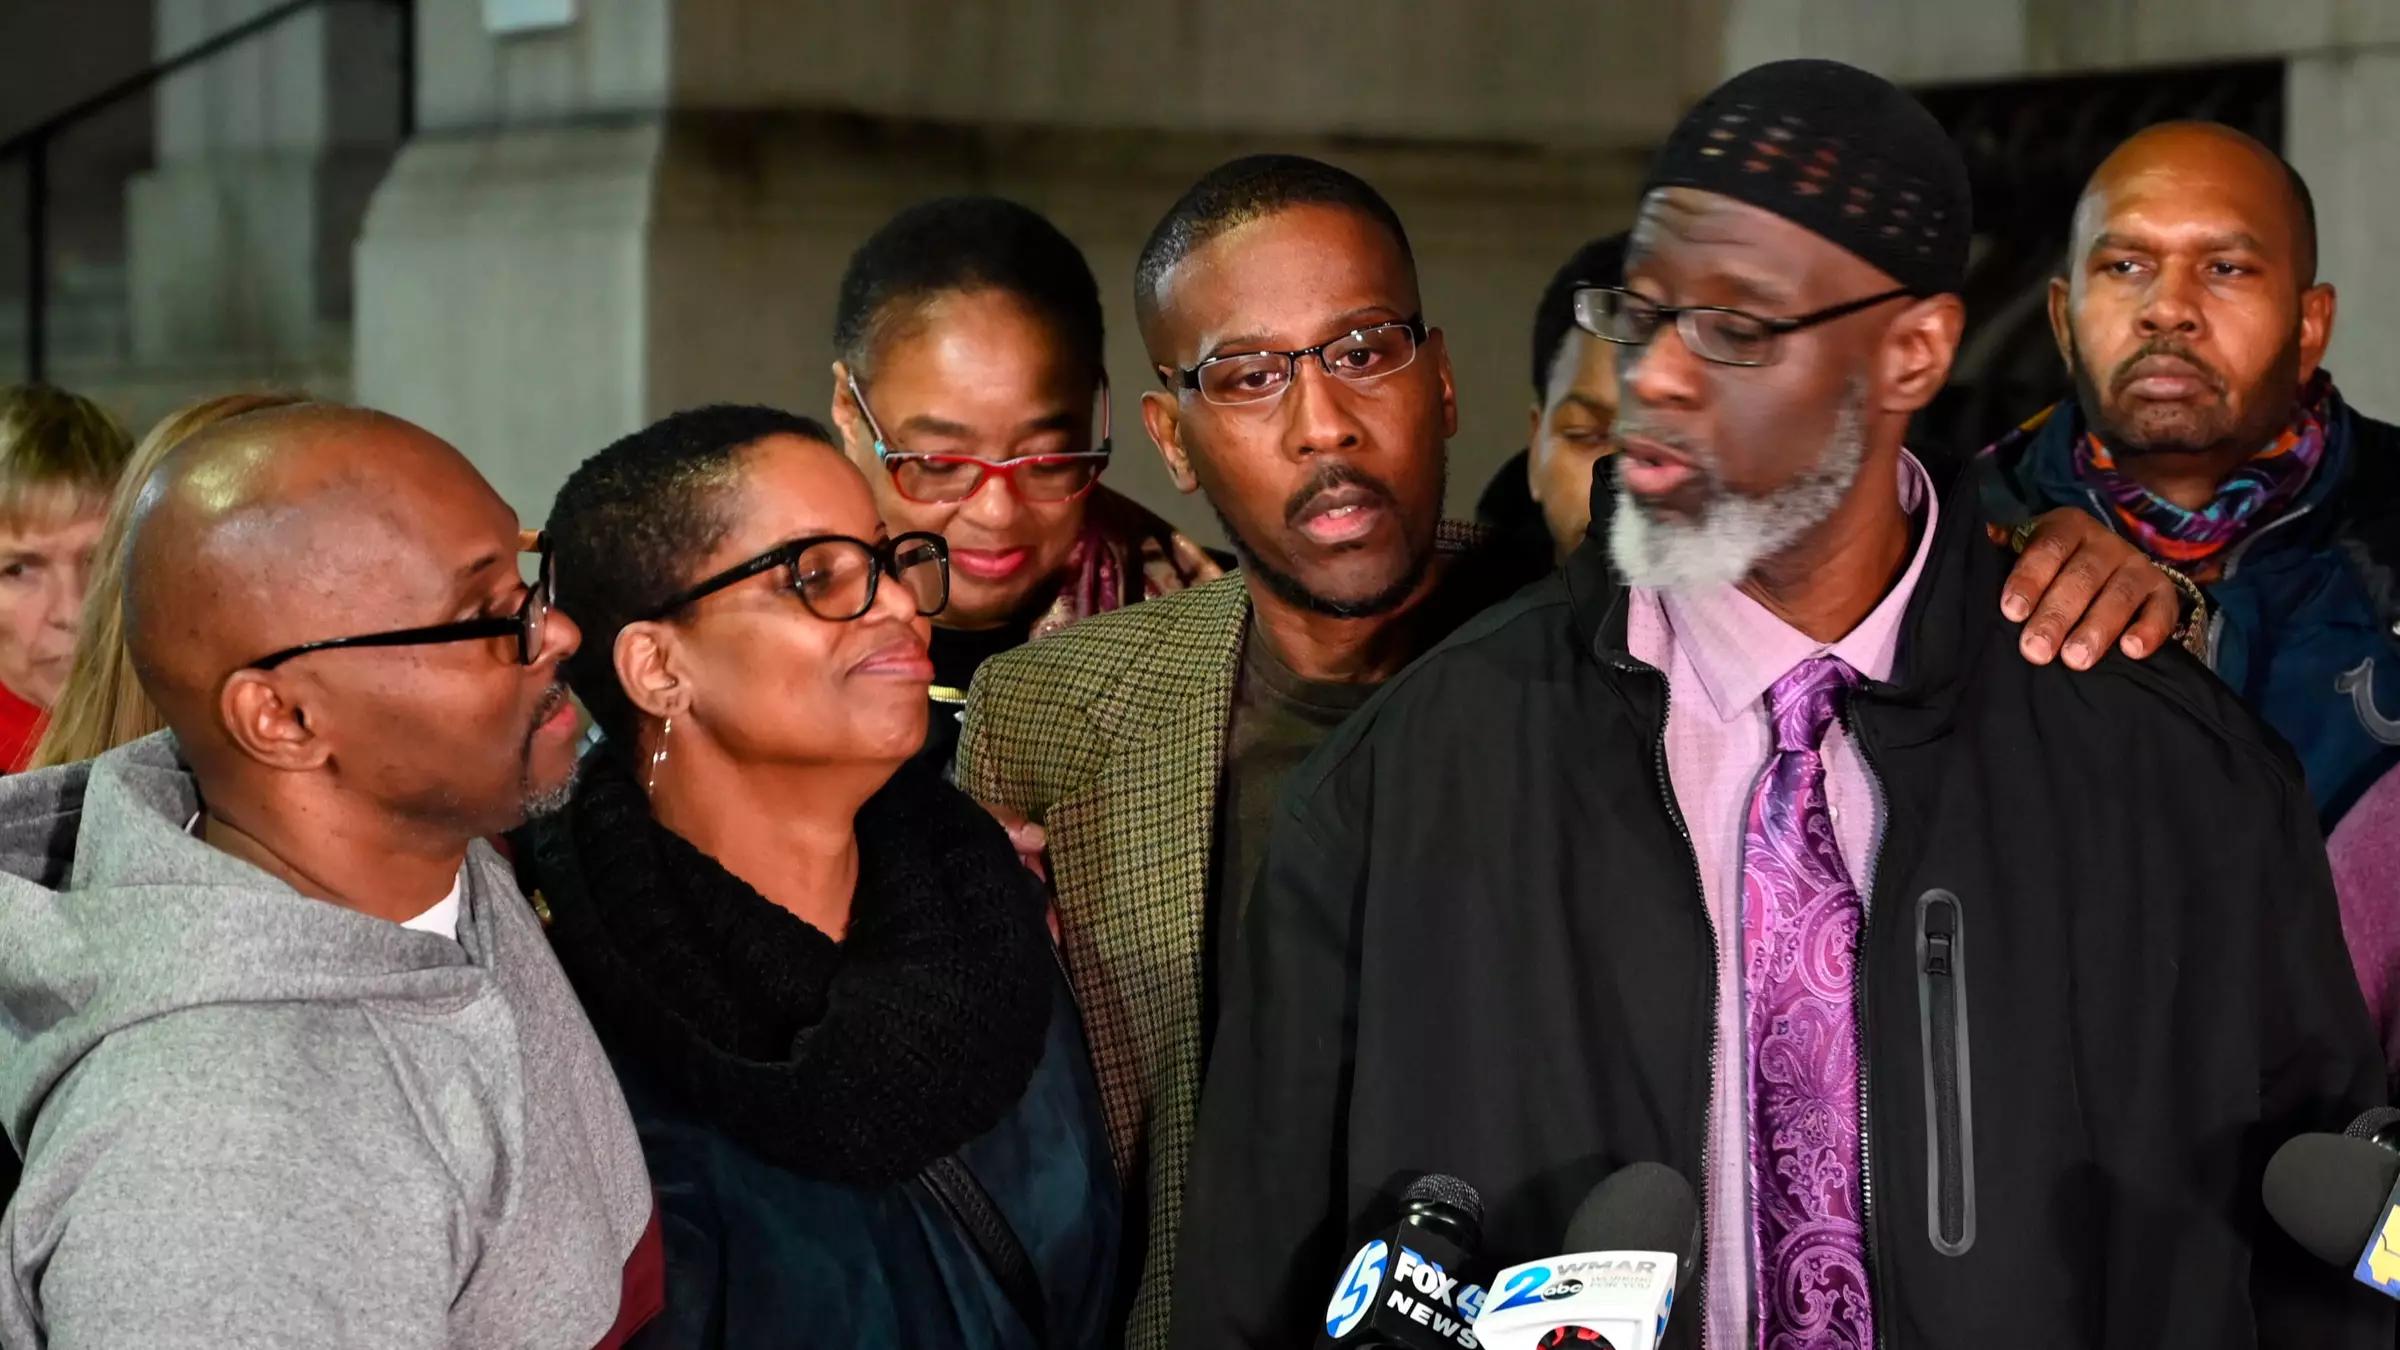 Three Men Released After Being Wrongfully Jailed For School Shooting 36 Years Ago As Court Blames 'Police Misconduct'